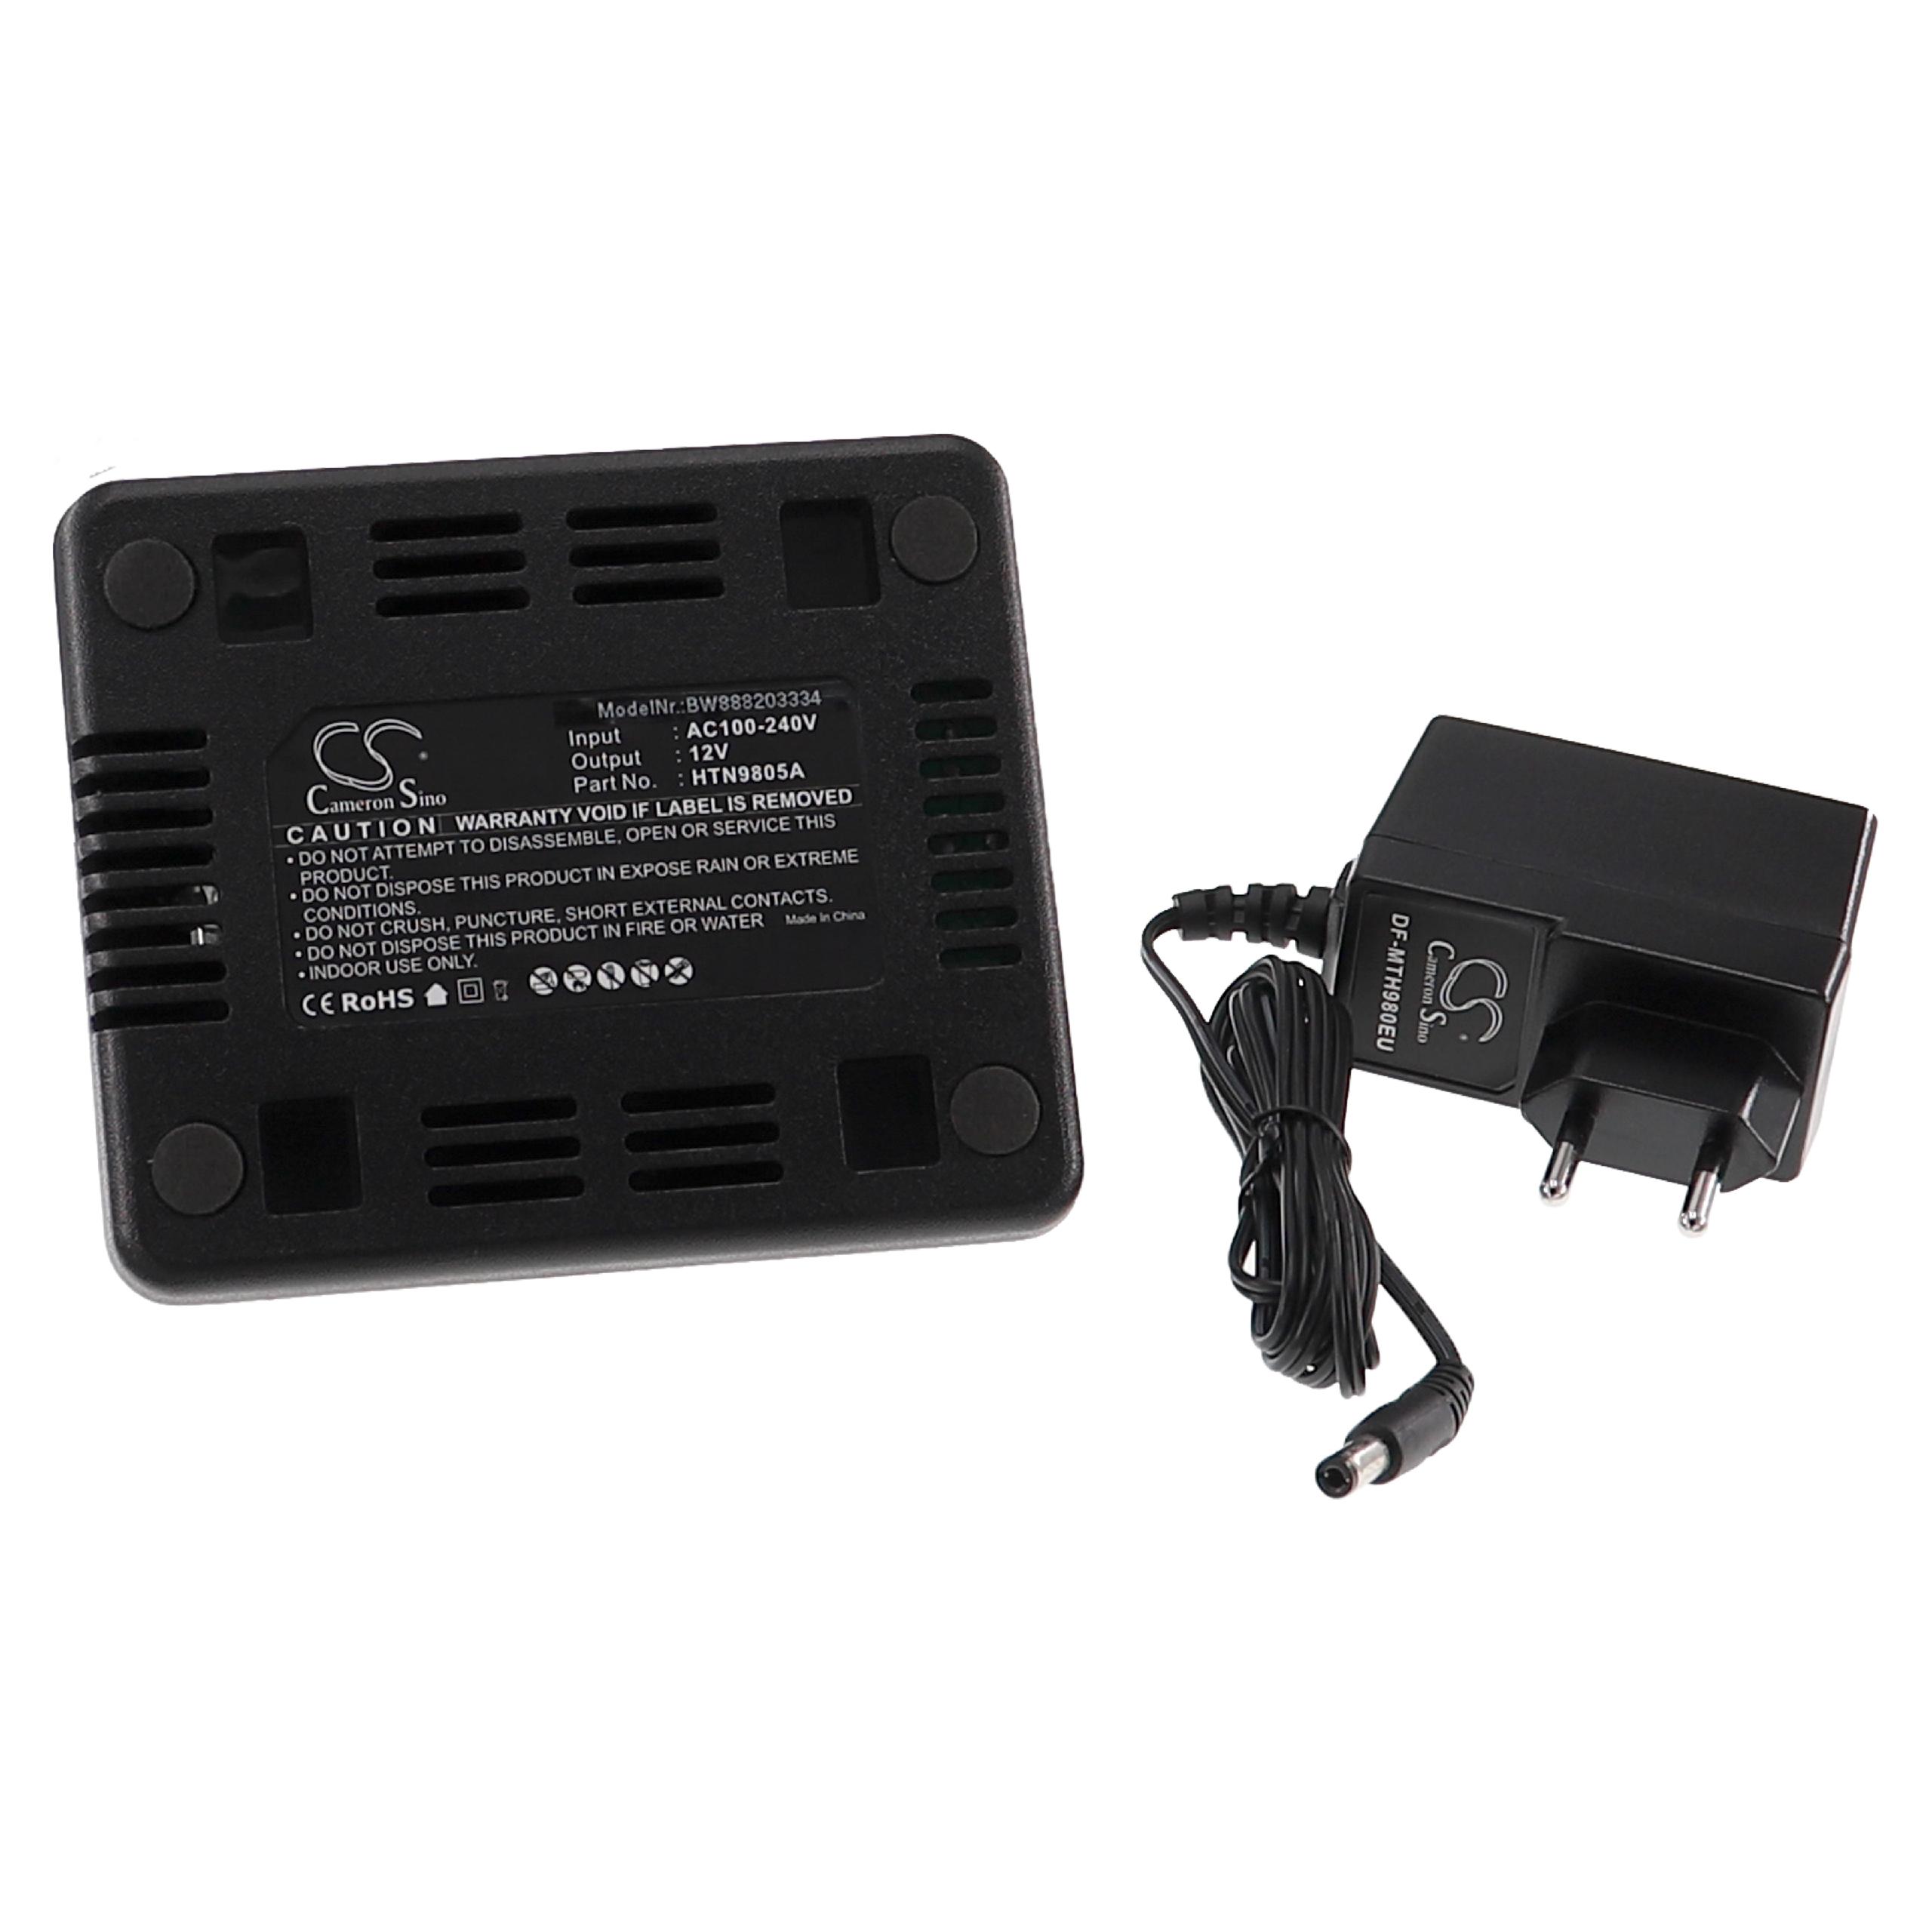 Charger Suitable for Motorola HTN9805A Radio Batteries - 12.0 V